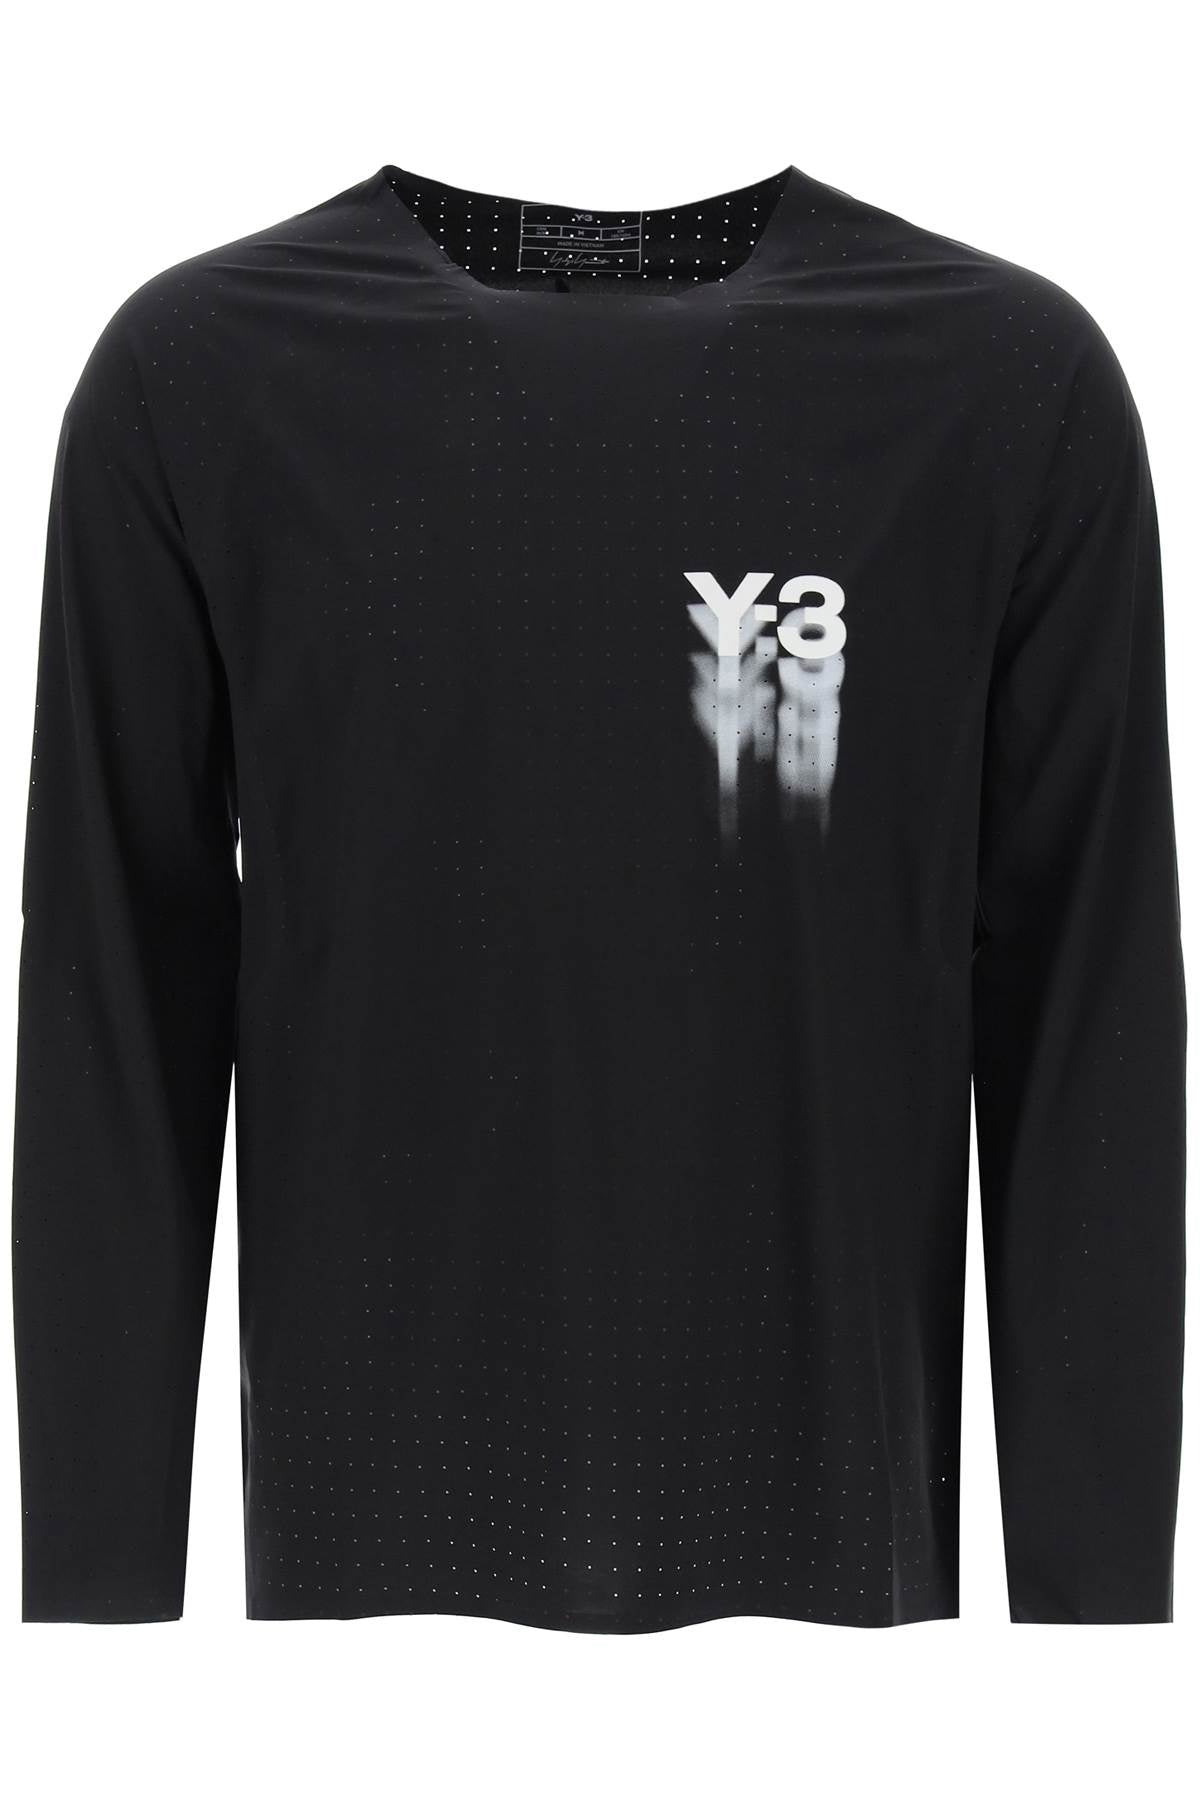 Y-3 long-sleeved perforated jersey t-men > clothing > t-shirts and sweatshirts > t-shirts-Y-3-Urbanheer